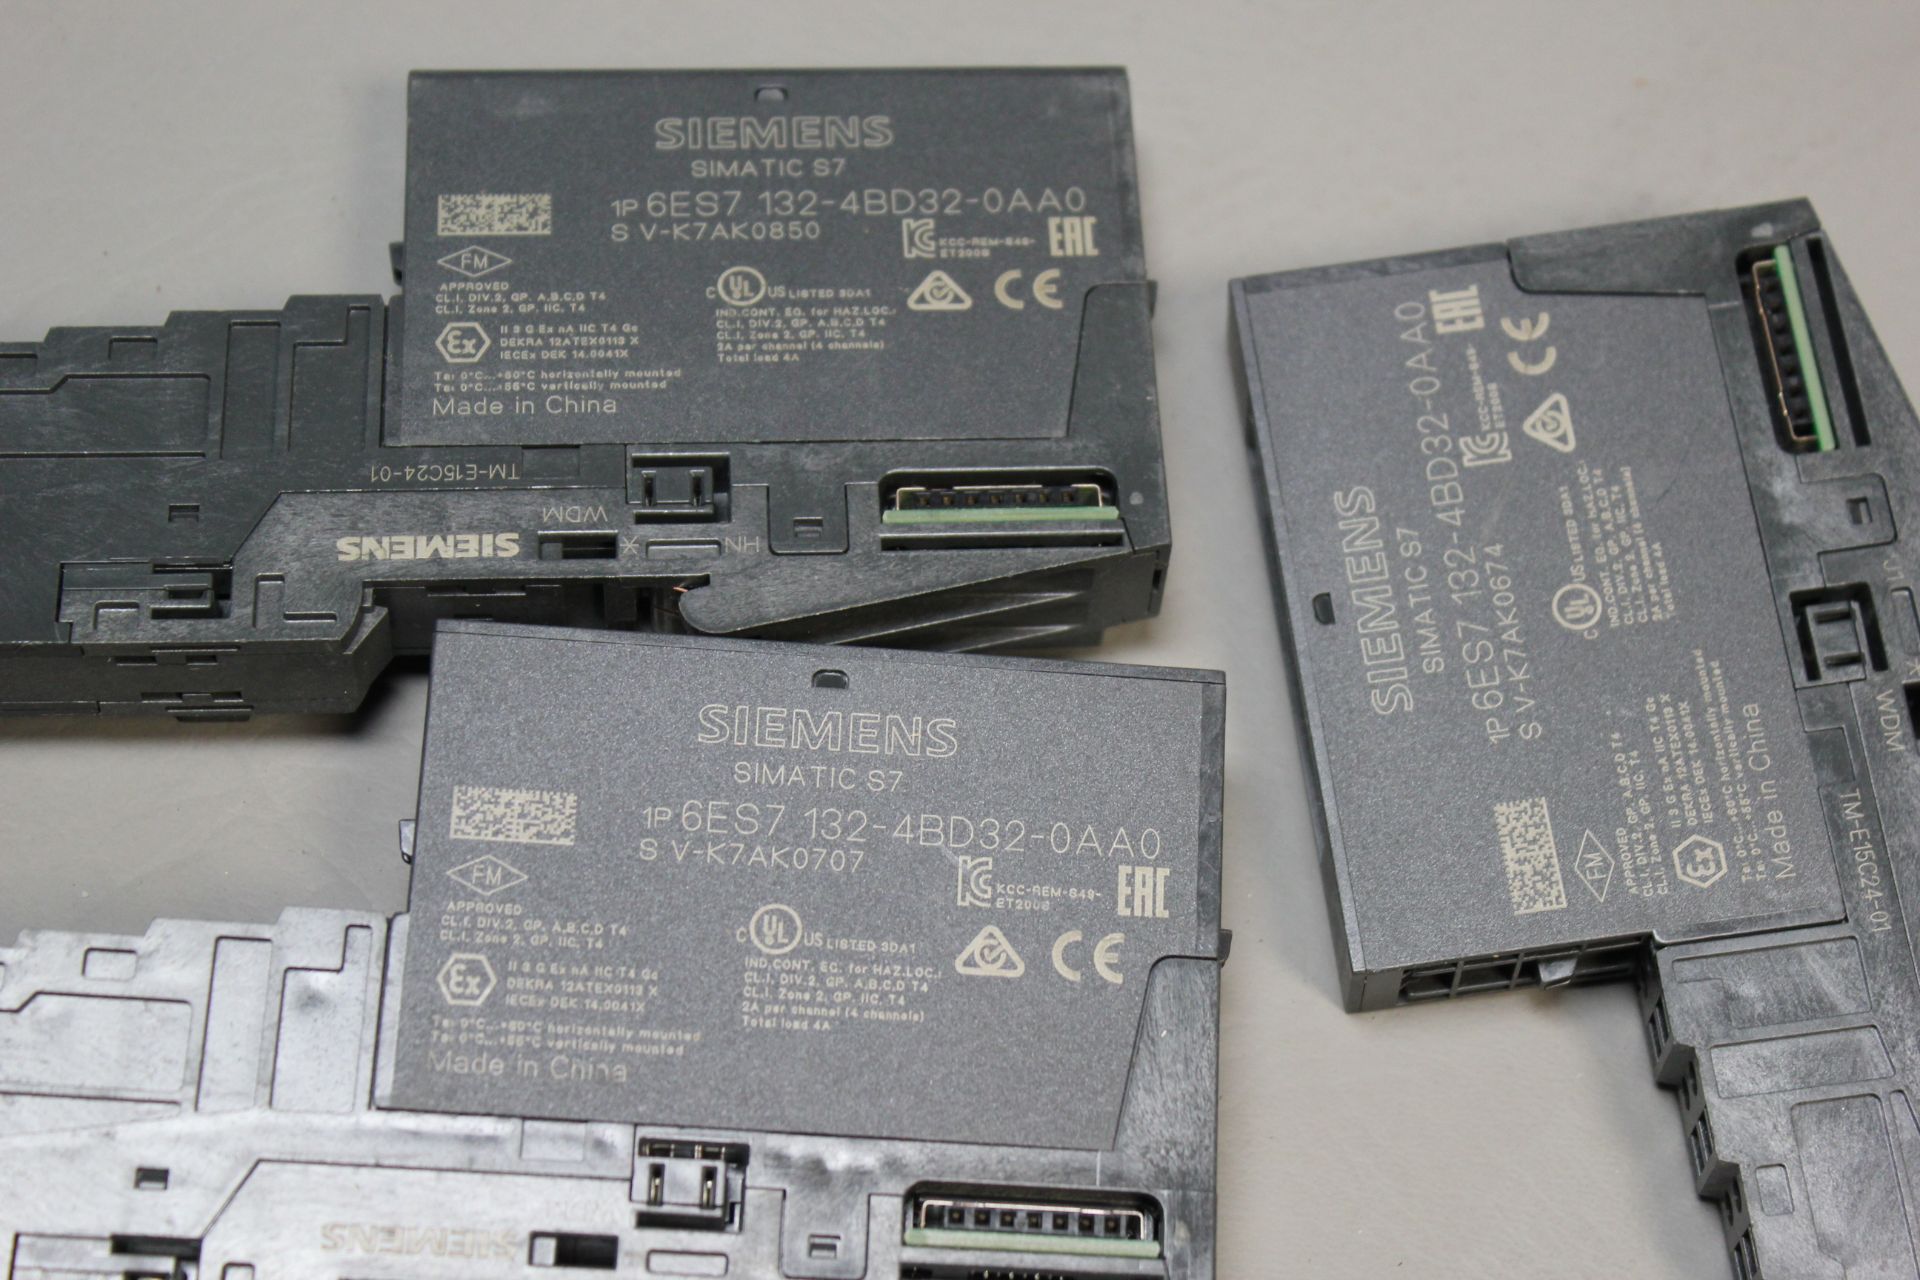 LOT OF SIEMENS SIMATIC S7 DIGITAL ELECTRONIC MODULES - Image 3 of 3